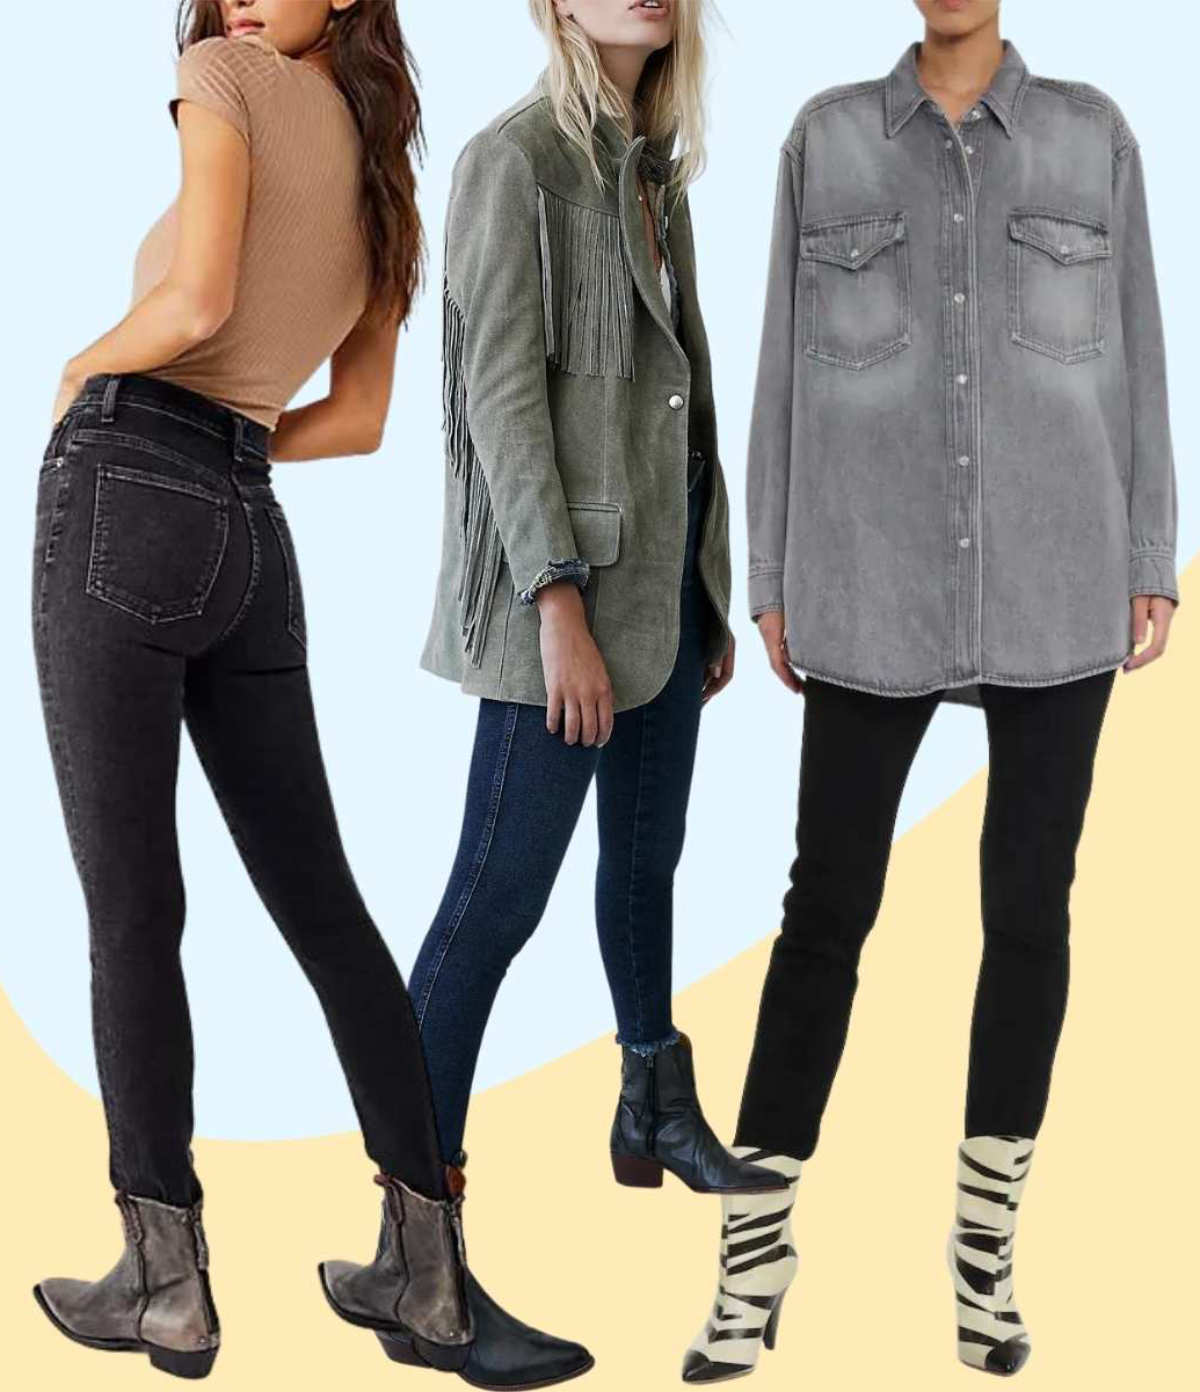 How to Rock Cowboy Boots with Skinny Jeans: Style Tips